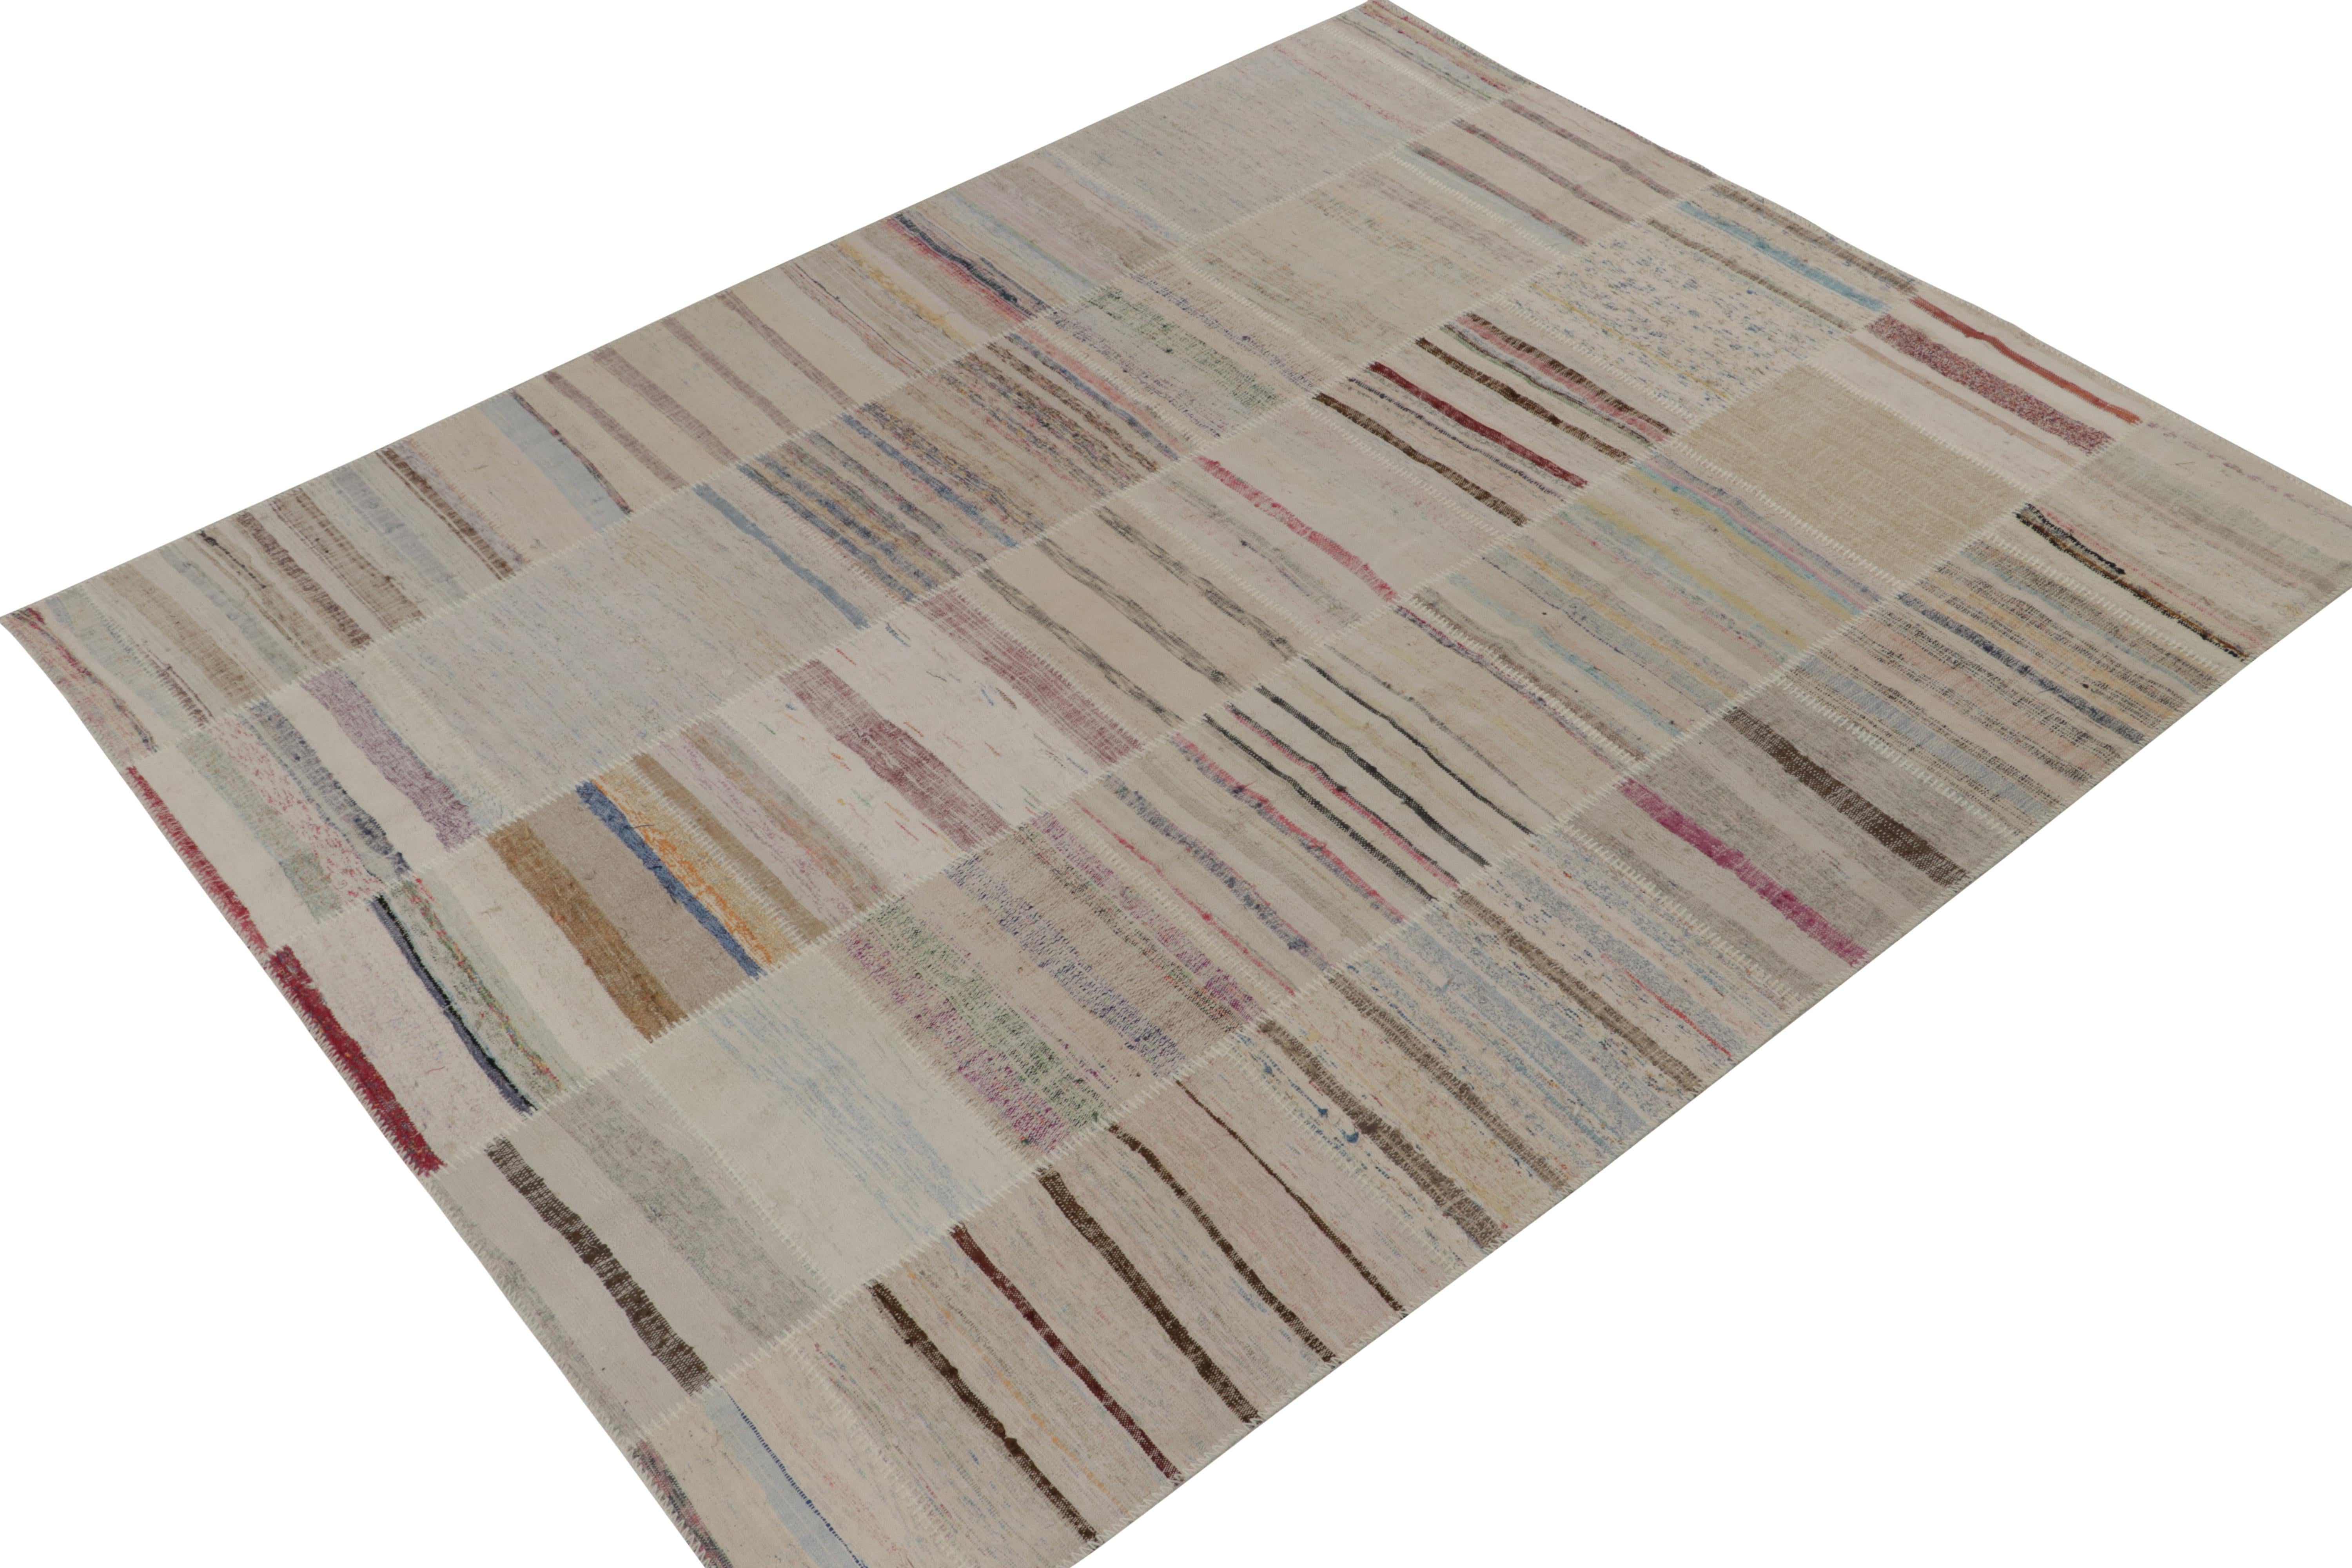 Rug & Kilim presents a contemporary 8x10 rug from their innovative new patchwork kilim collection. 

On the Design: 

This flat weave technique repurposes vintage yarns in polychromatic stripes and striae, achieving a playful look with fabulous